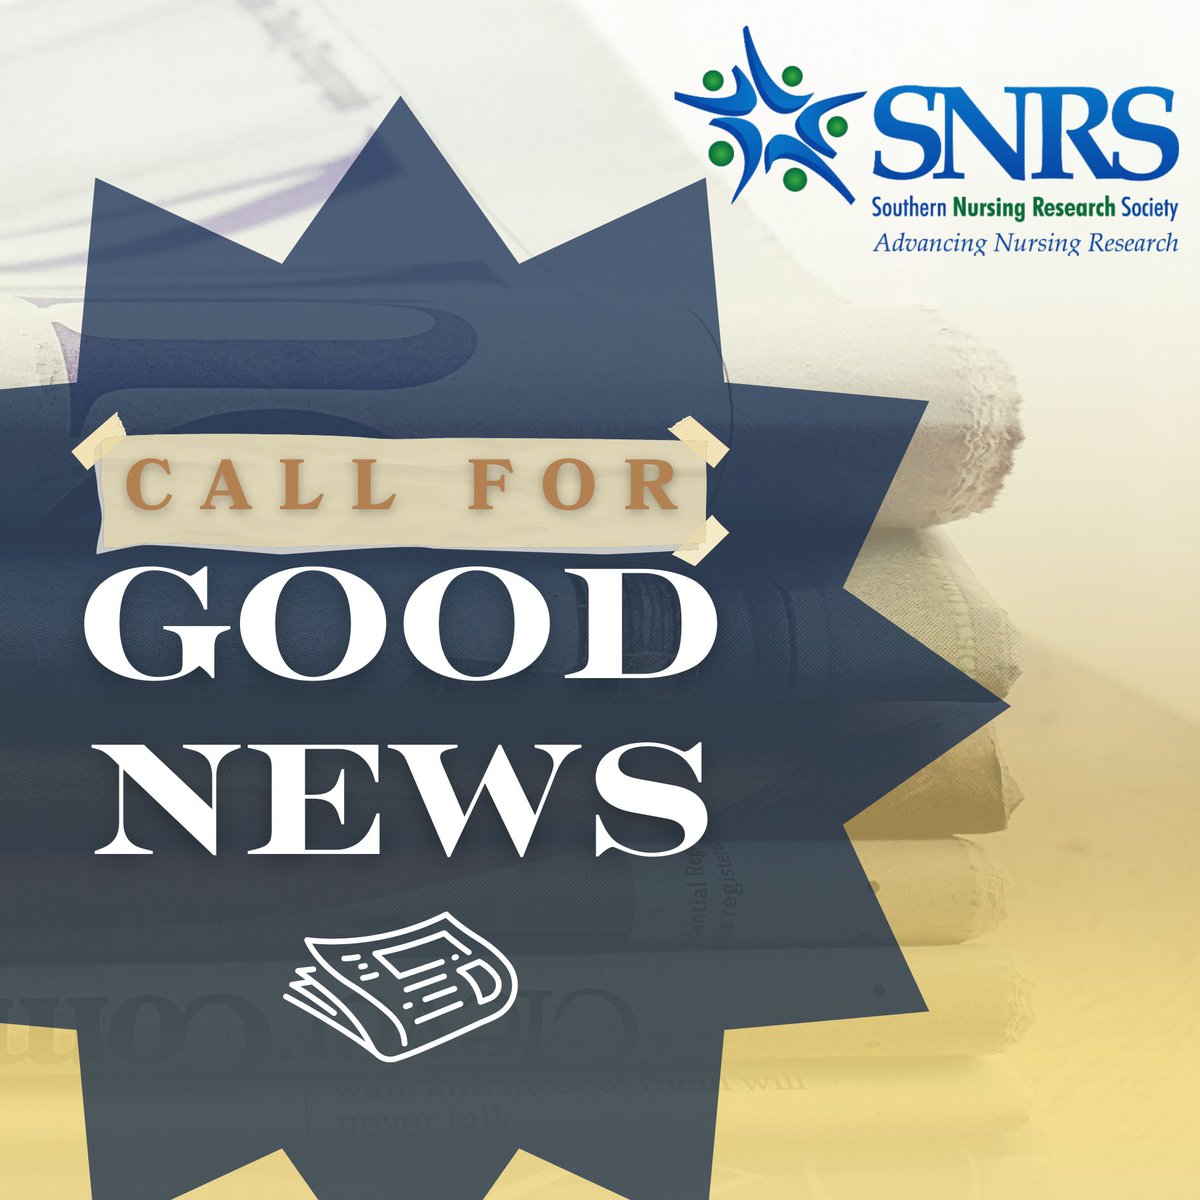 Do you have good news to share? SNRS wants to hear about your accomplishments, grants awarded, articles published, research projects, and more. If it's important to you, it's important to us! Share with us here: lnkd.in/e5vcm93W